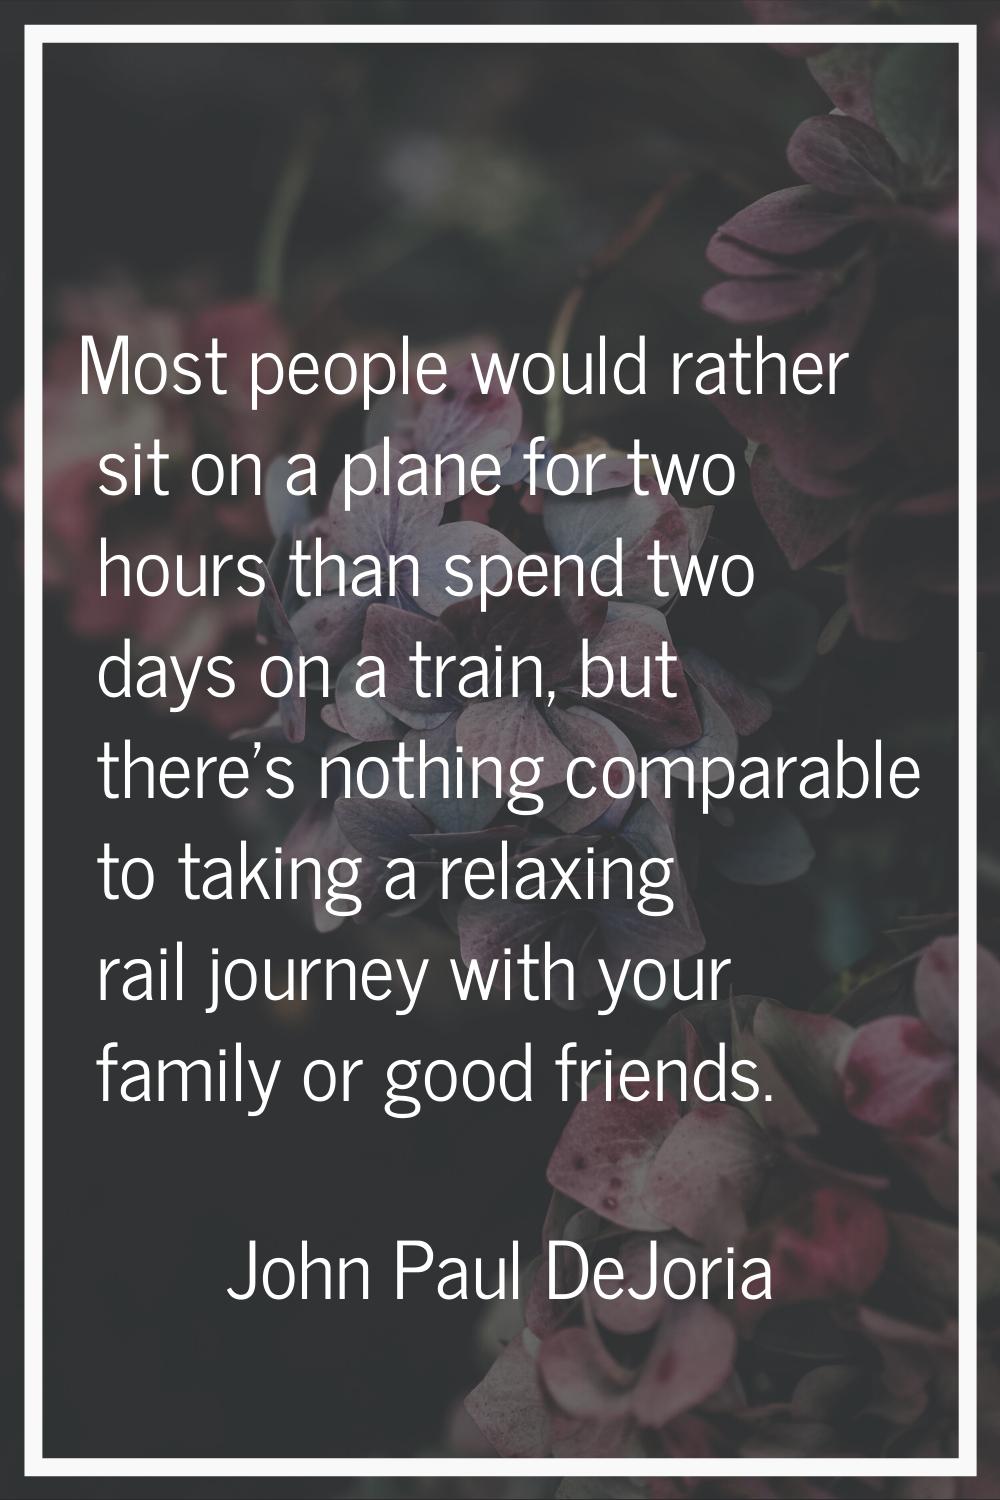 Most people would rather sit on a plane for two hours than spend two days on a train, but there's n